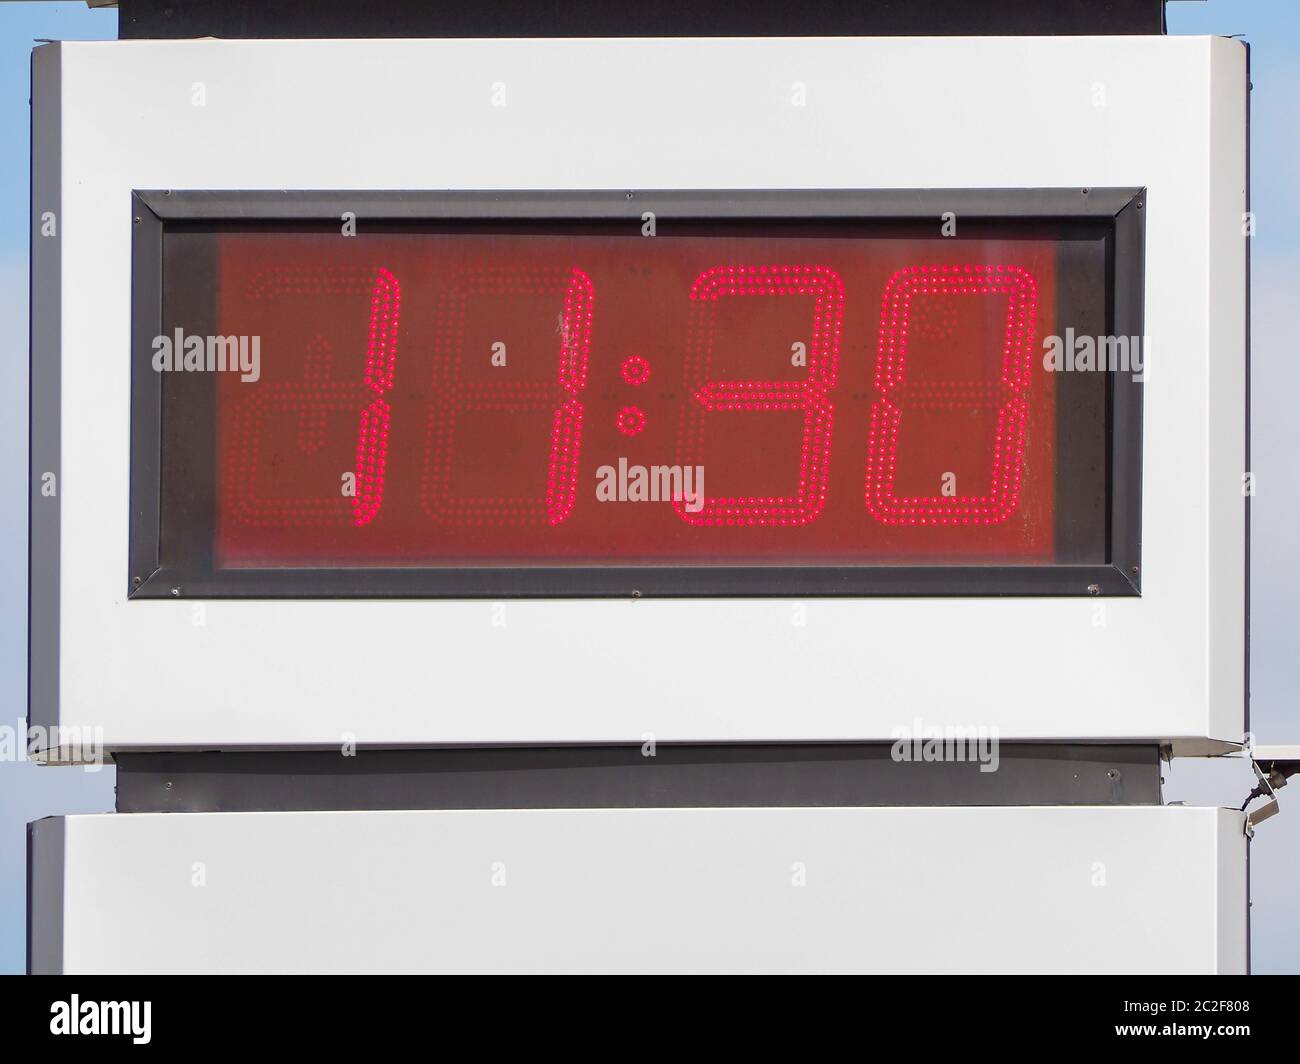 red led display showing time 11:30 (half past eleven) Stock Photo